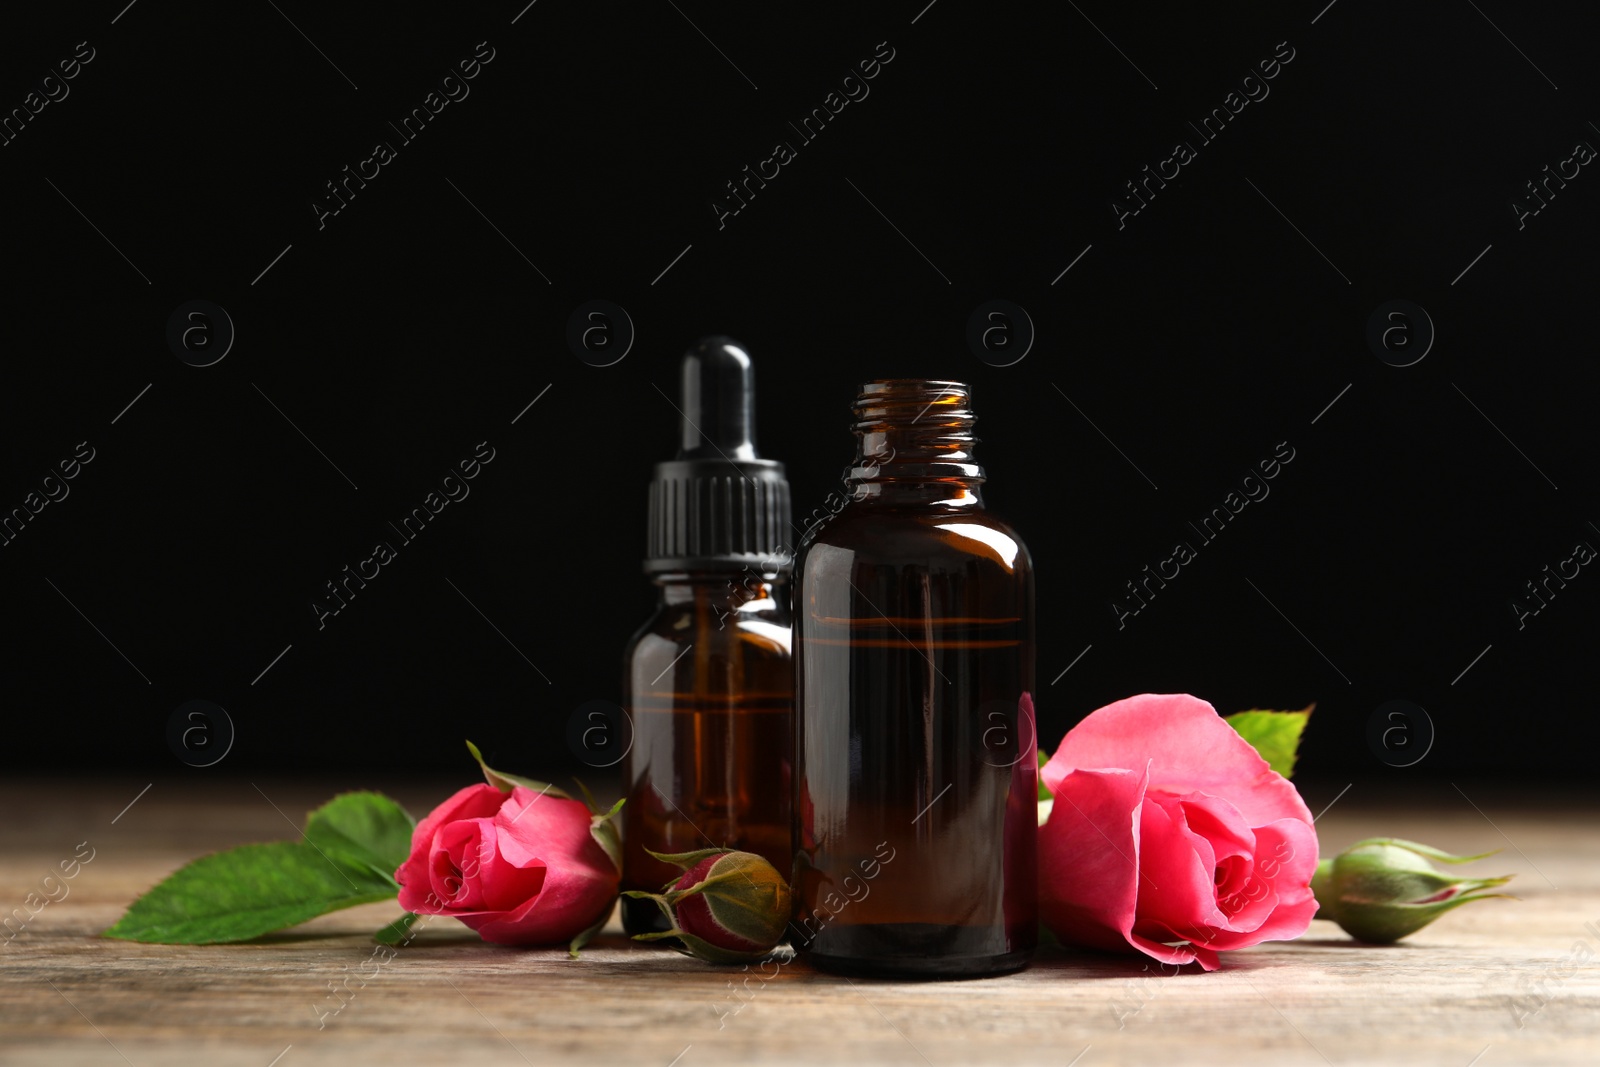 Photo of Bottles of rose essential oil and flowers on wooden table against black background